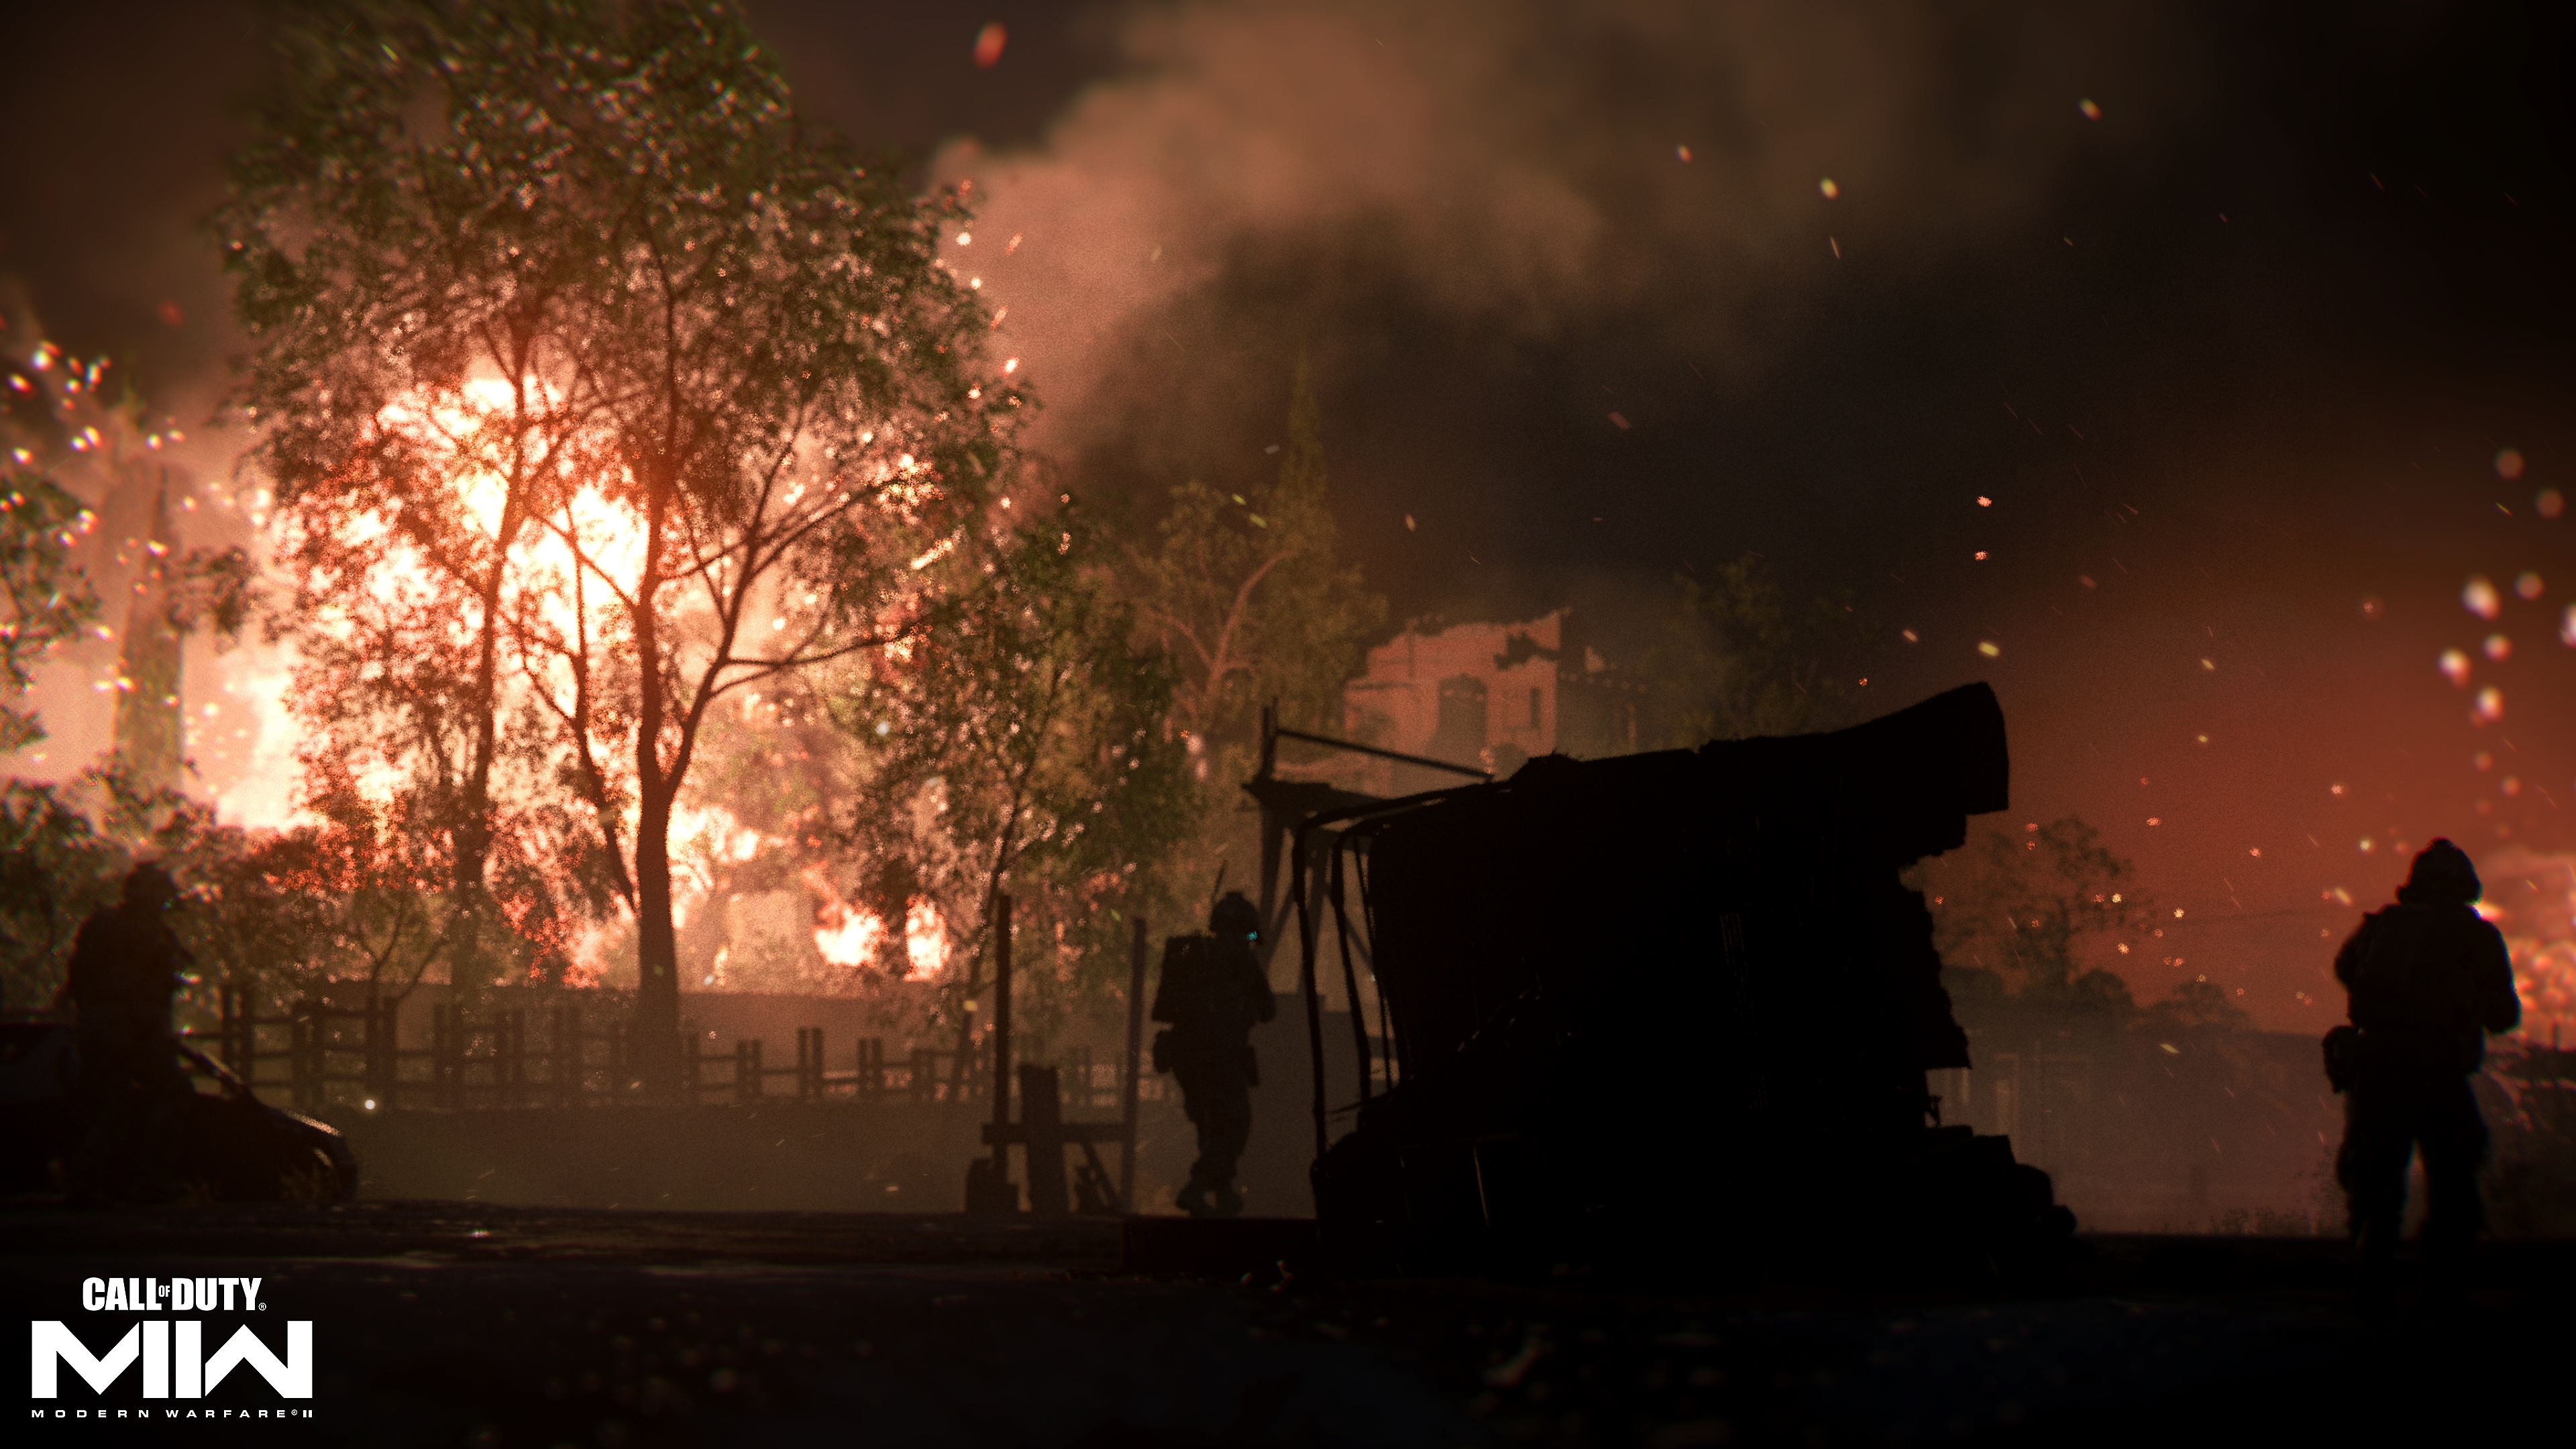 Call of Duty: Modern Warfare 2 2022 screenshot showing a fire in the distance behind a tree